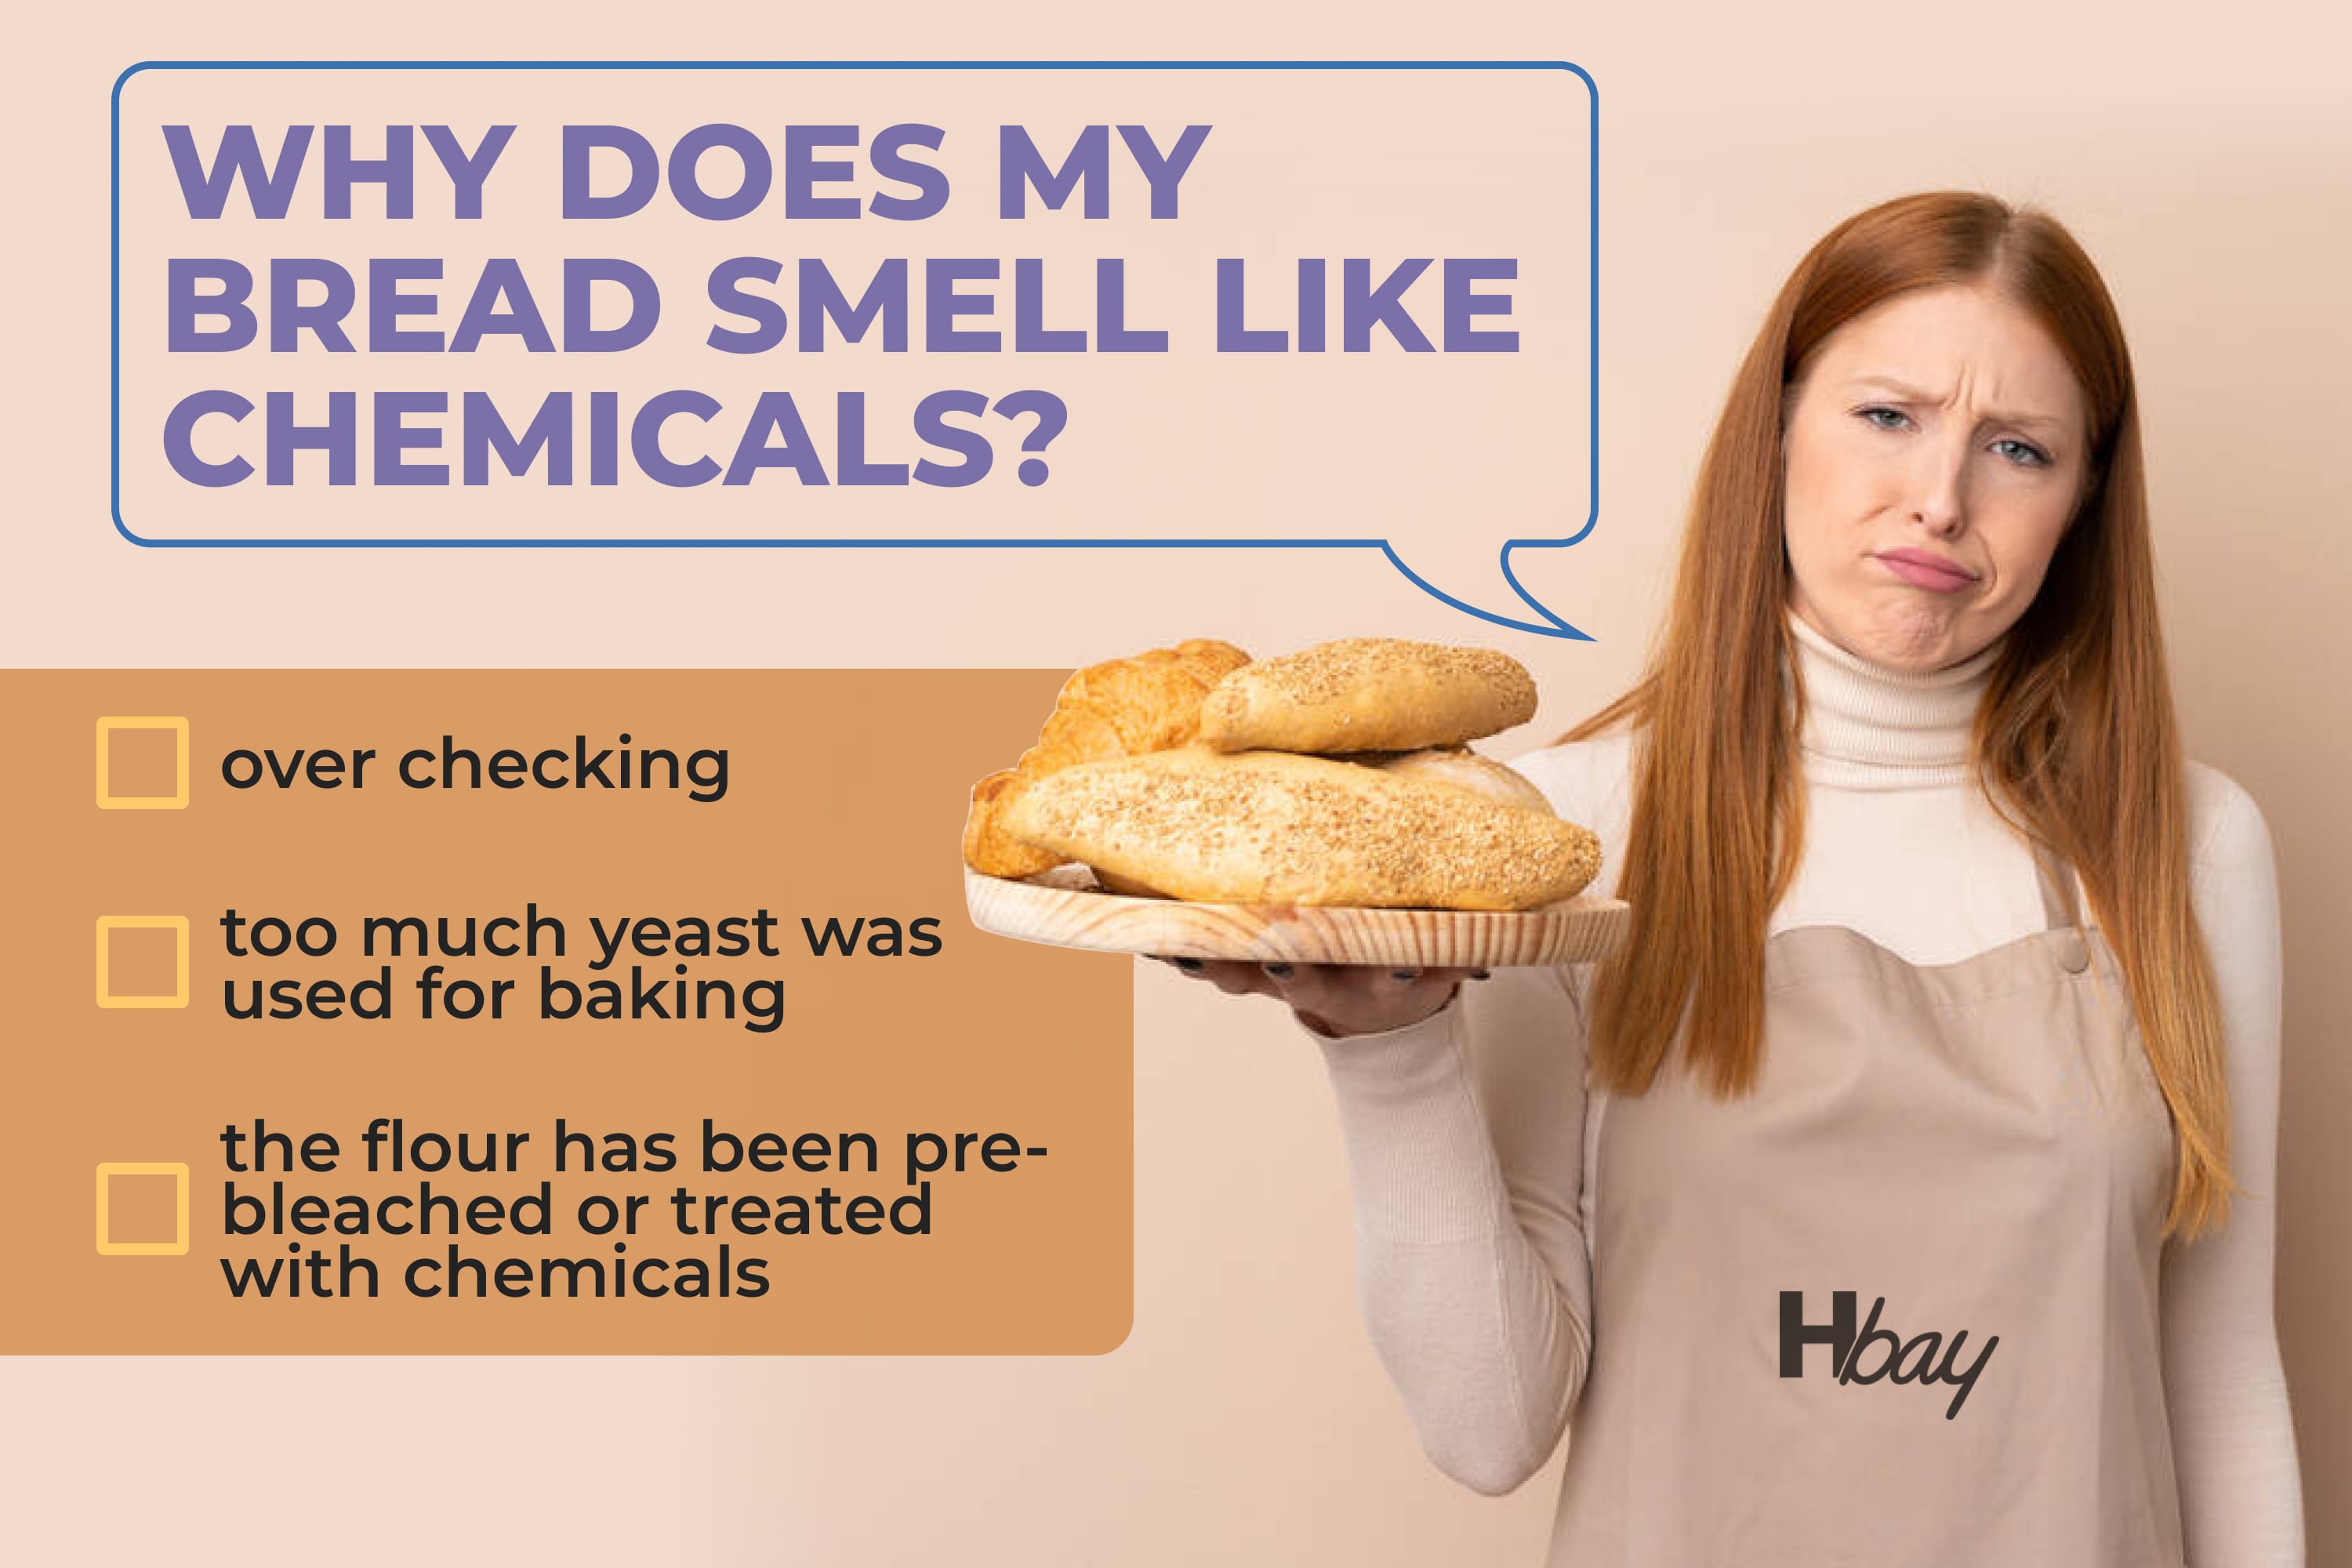 Why does my bread smell like chemicals